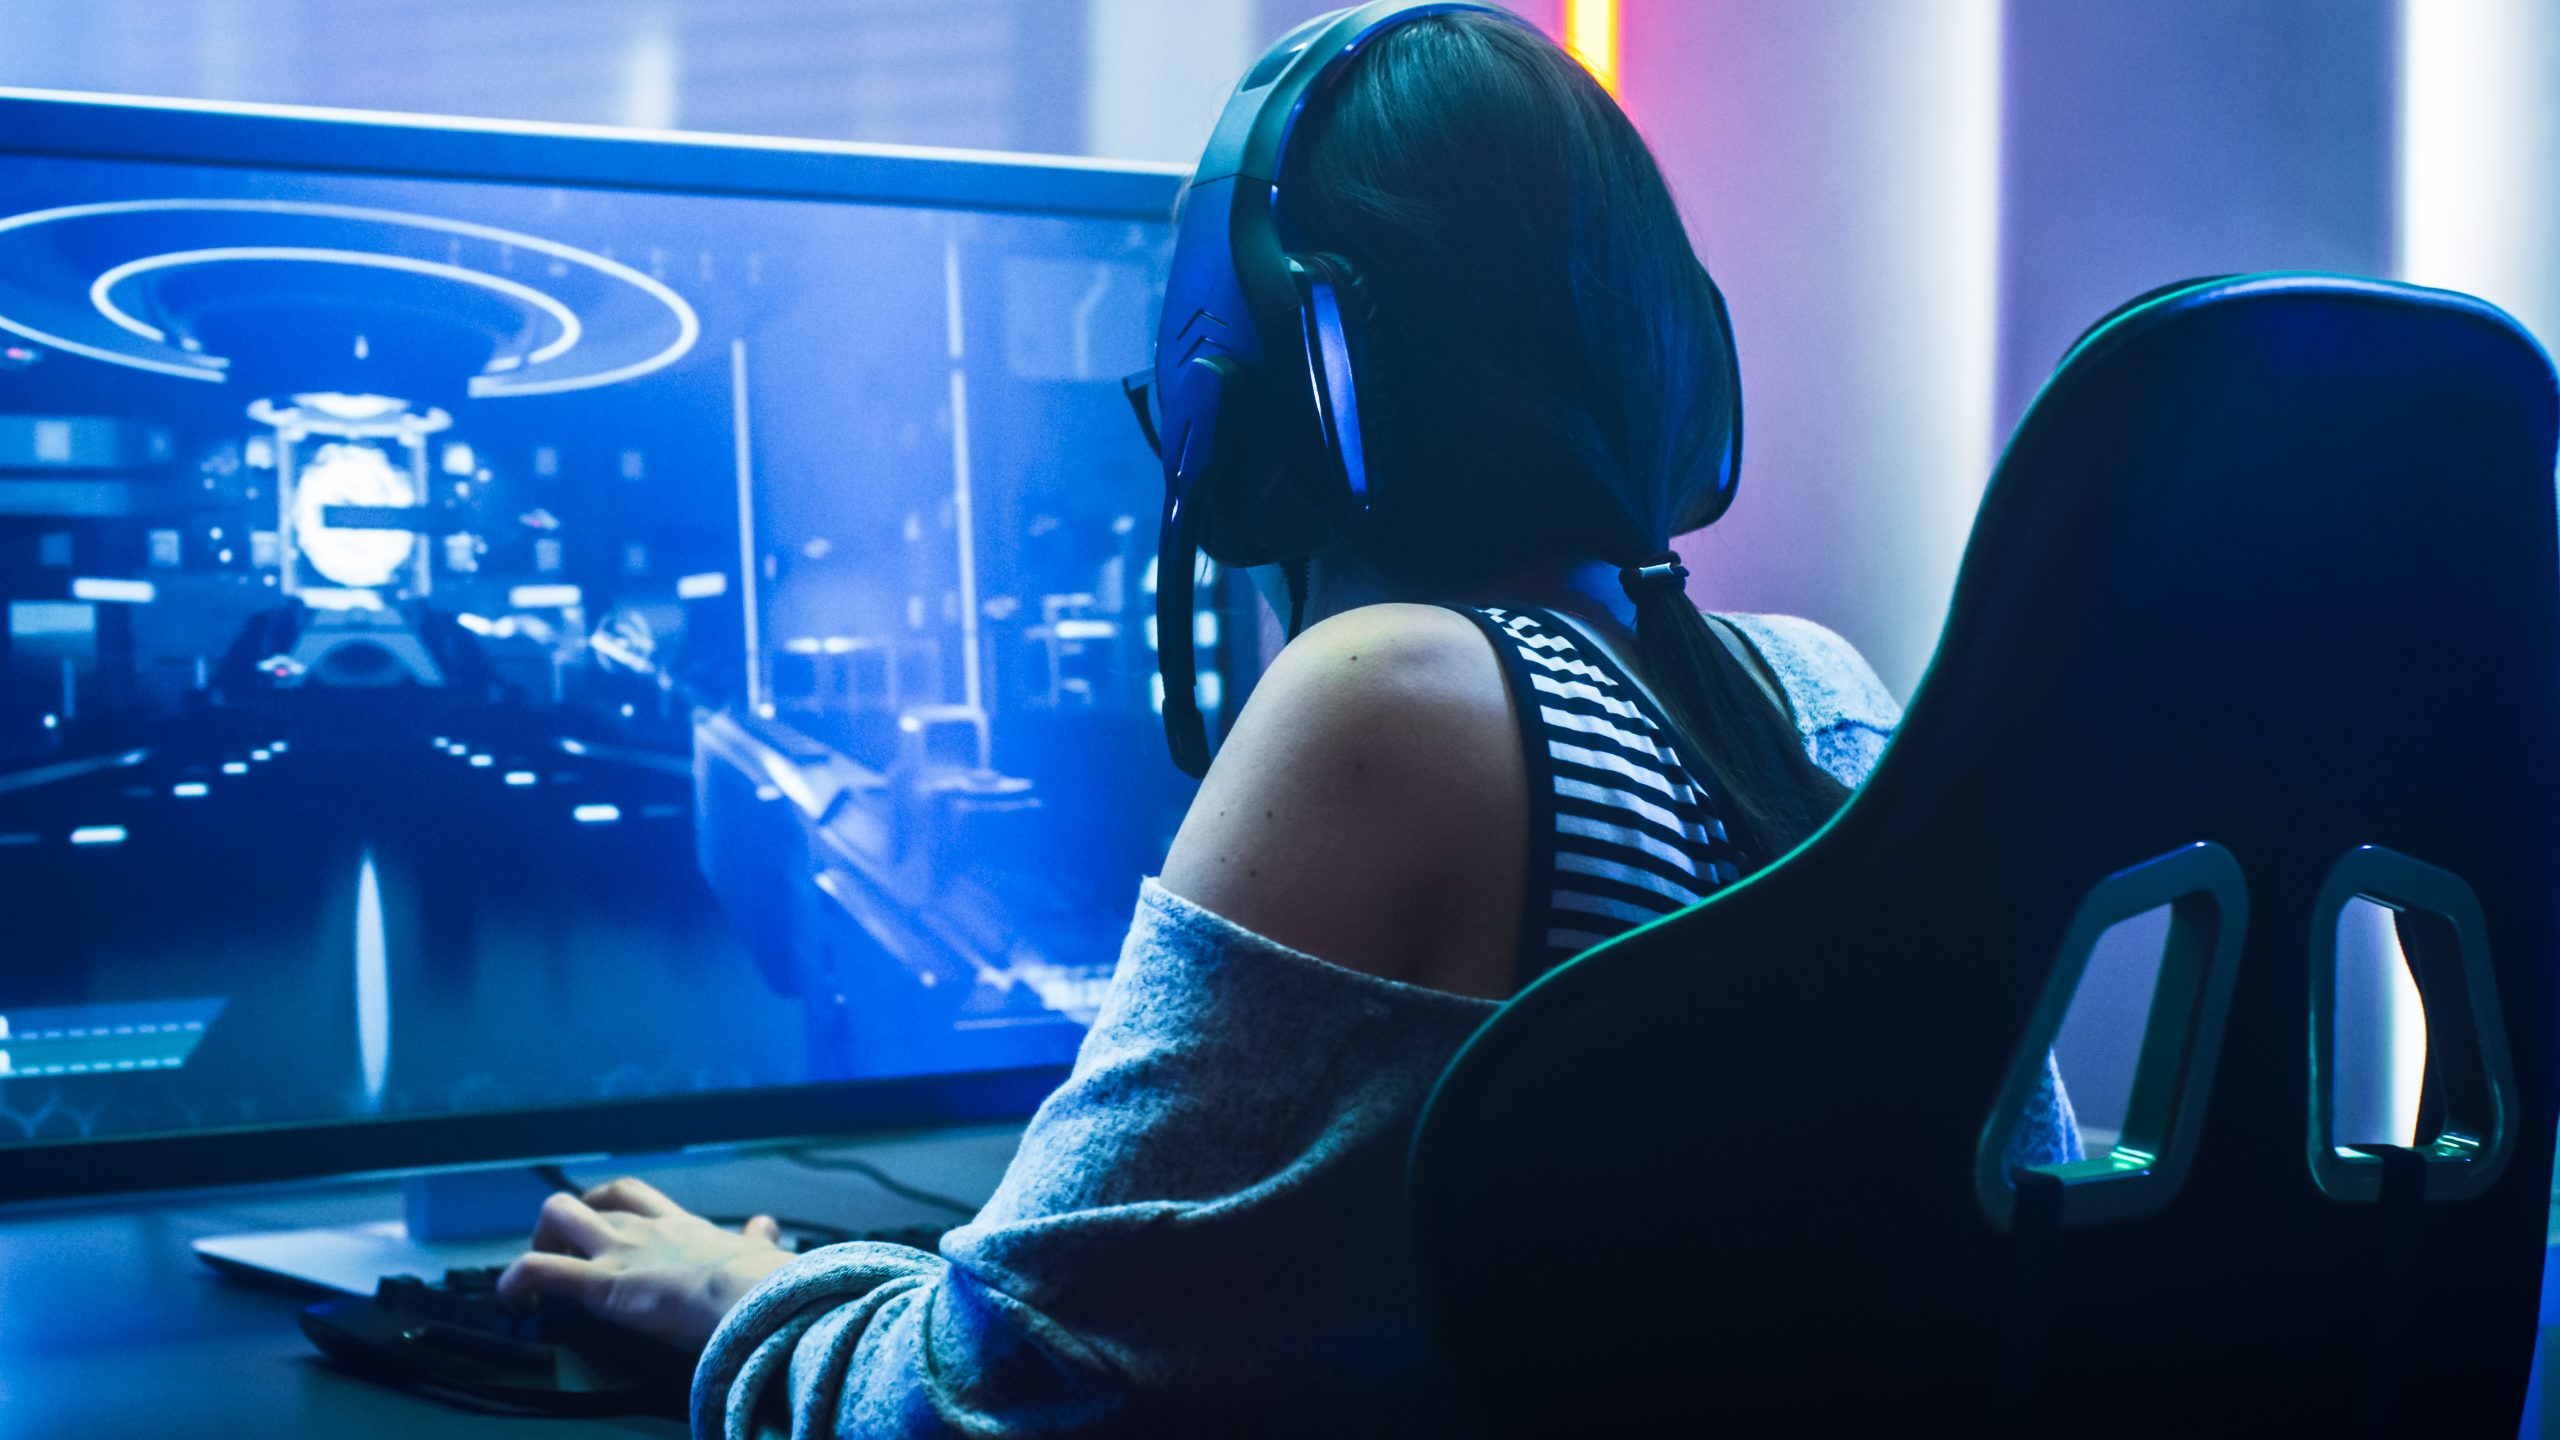 Lady playing computer games